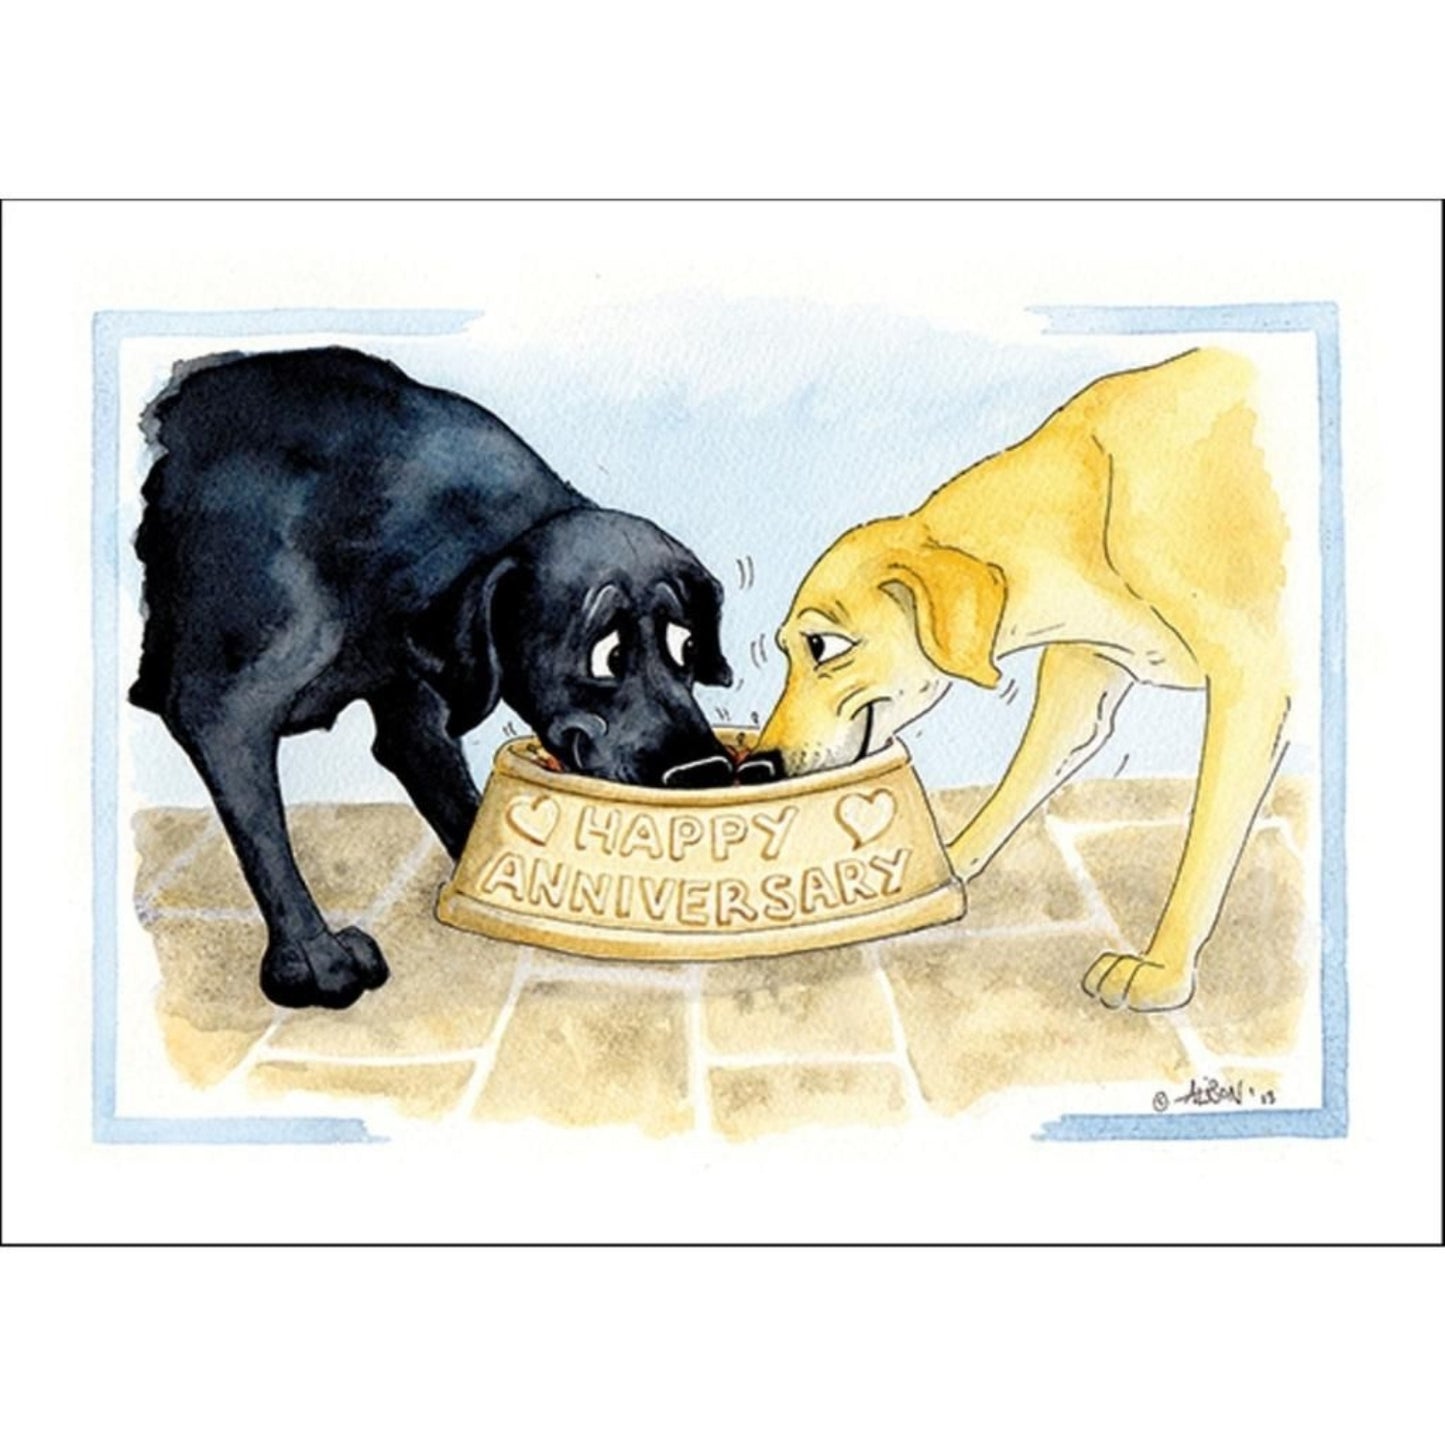 Alisons Animals Funny Dog Card "Anniversary - What's Mine is Yours"